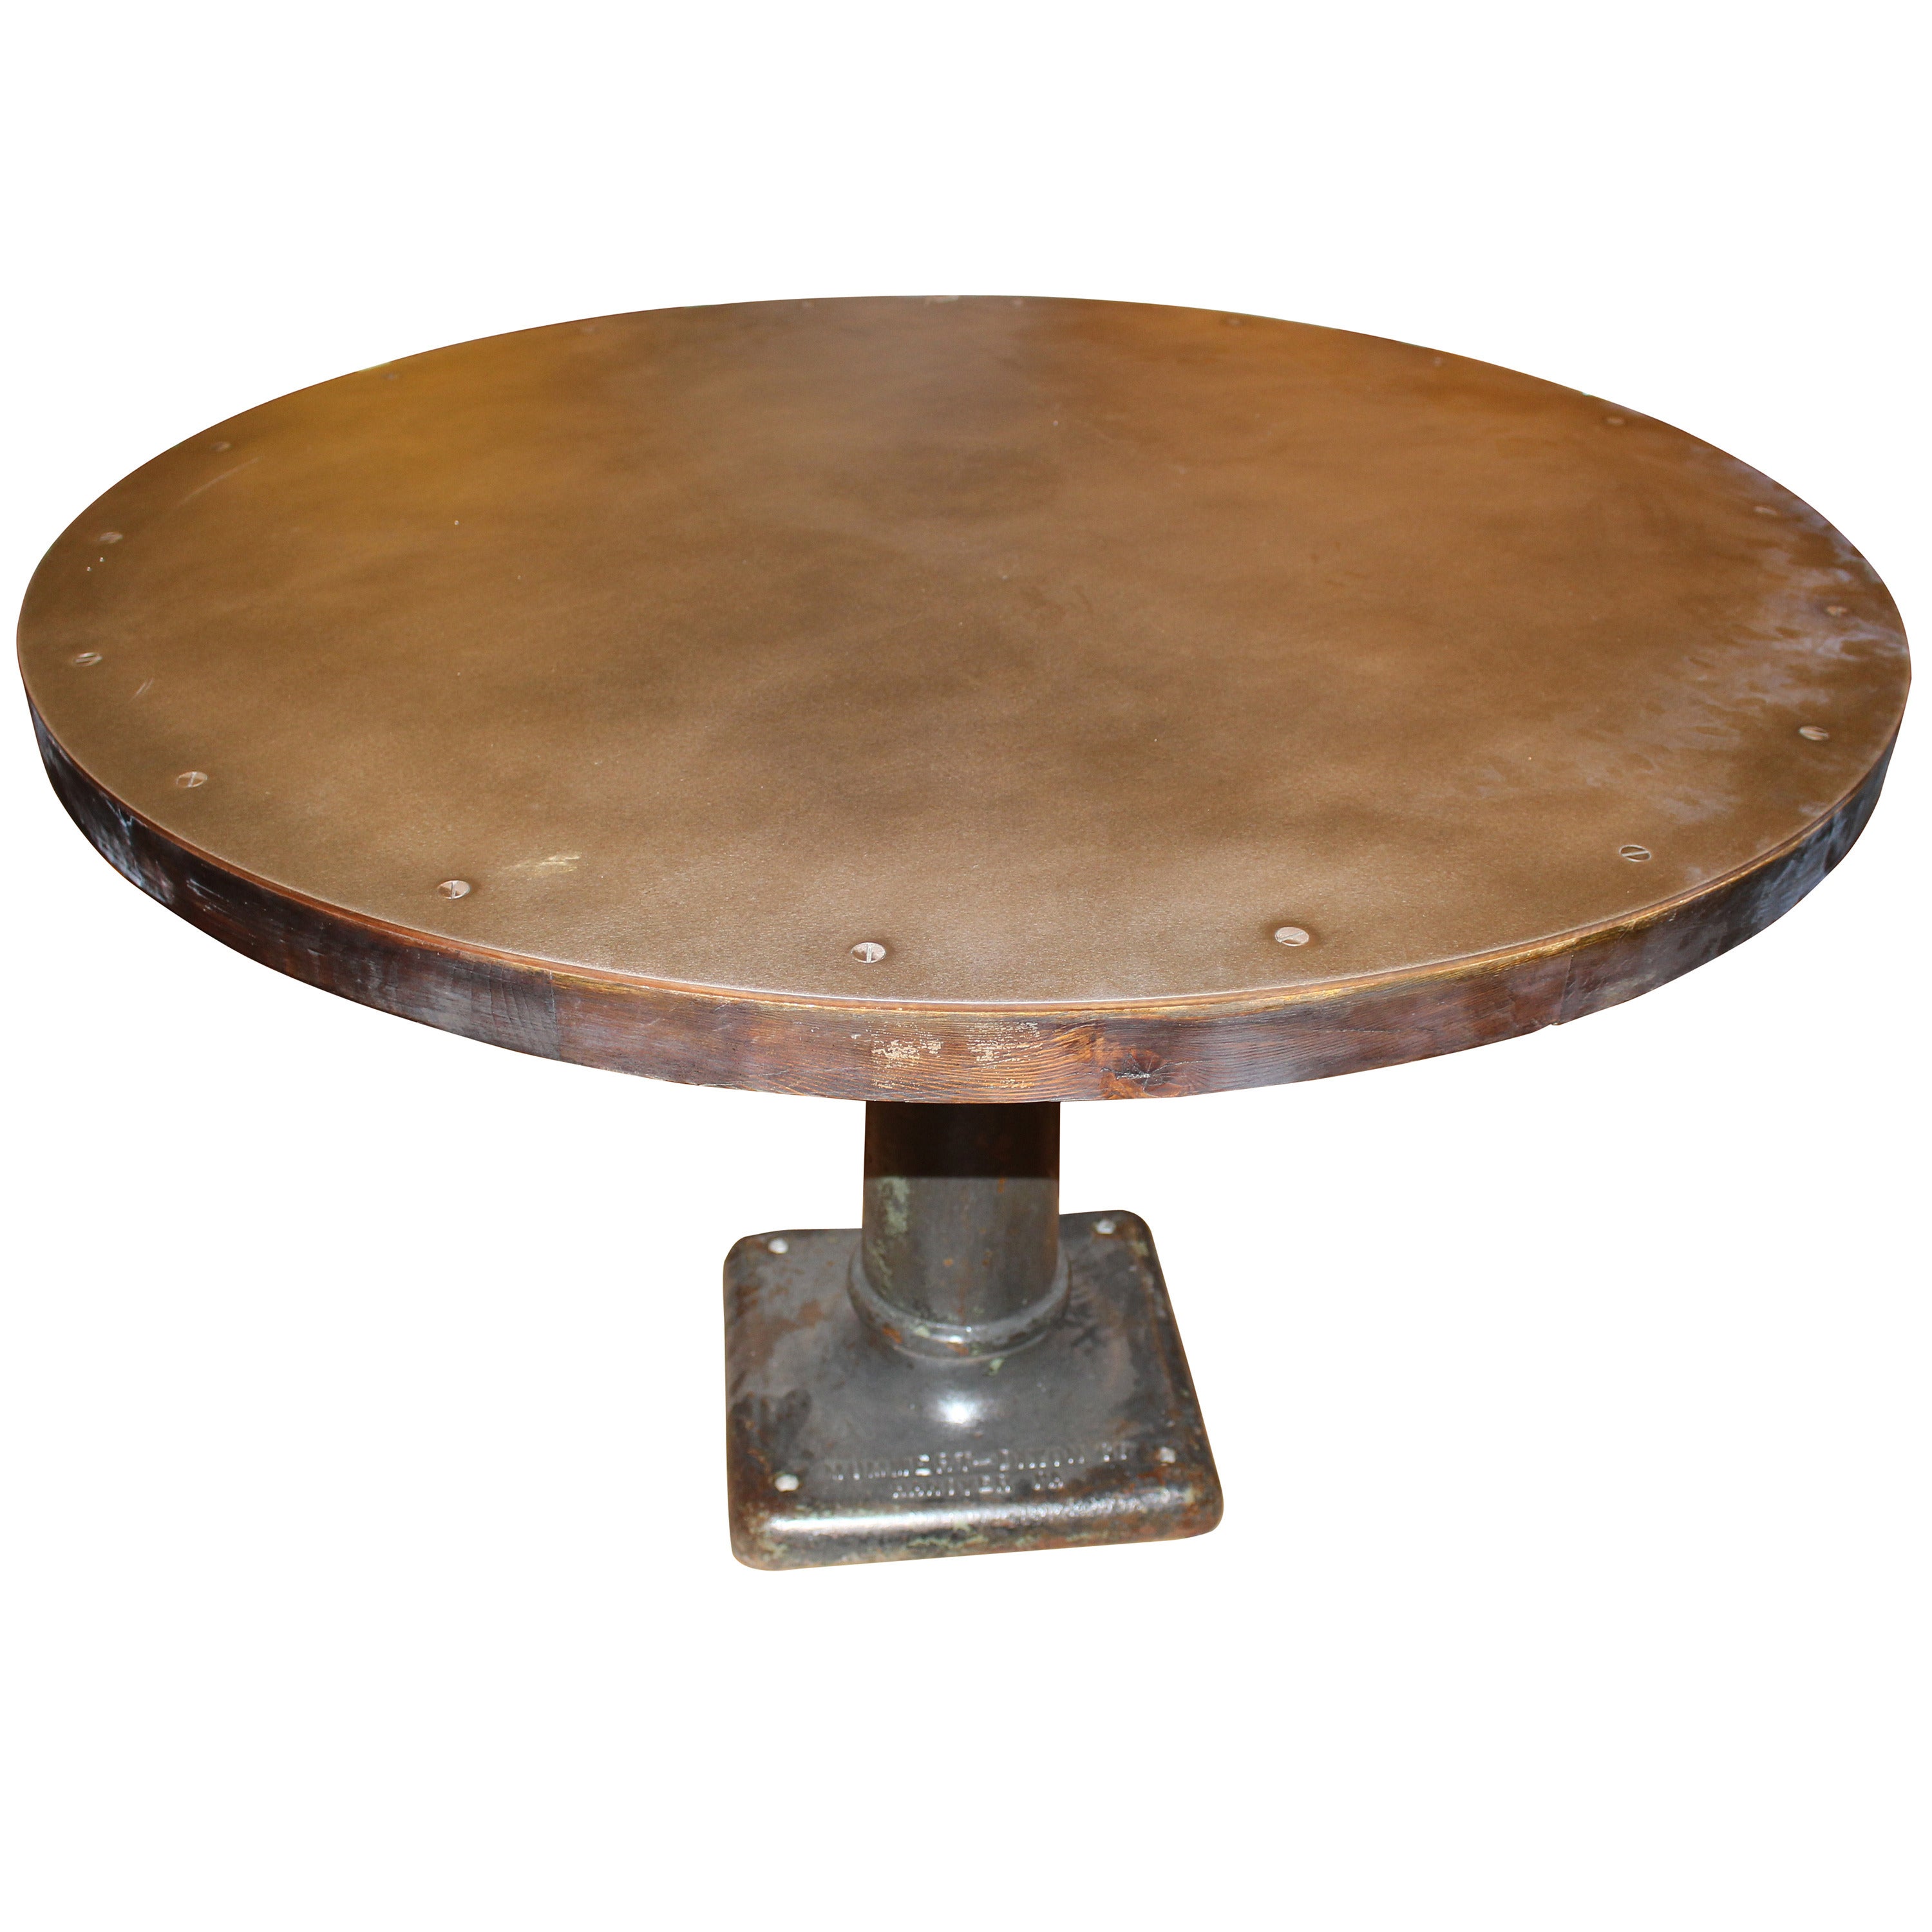 Round Hot Rolled Steel Table with Bolts and Industrial Machine Pedestal Base